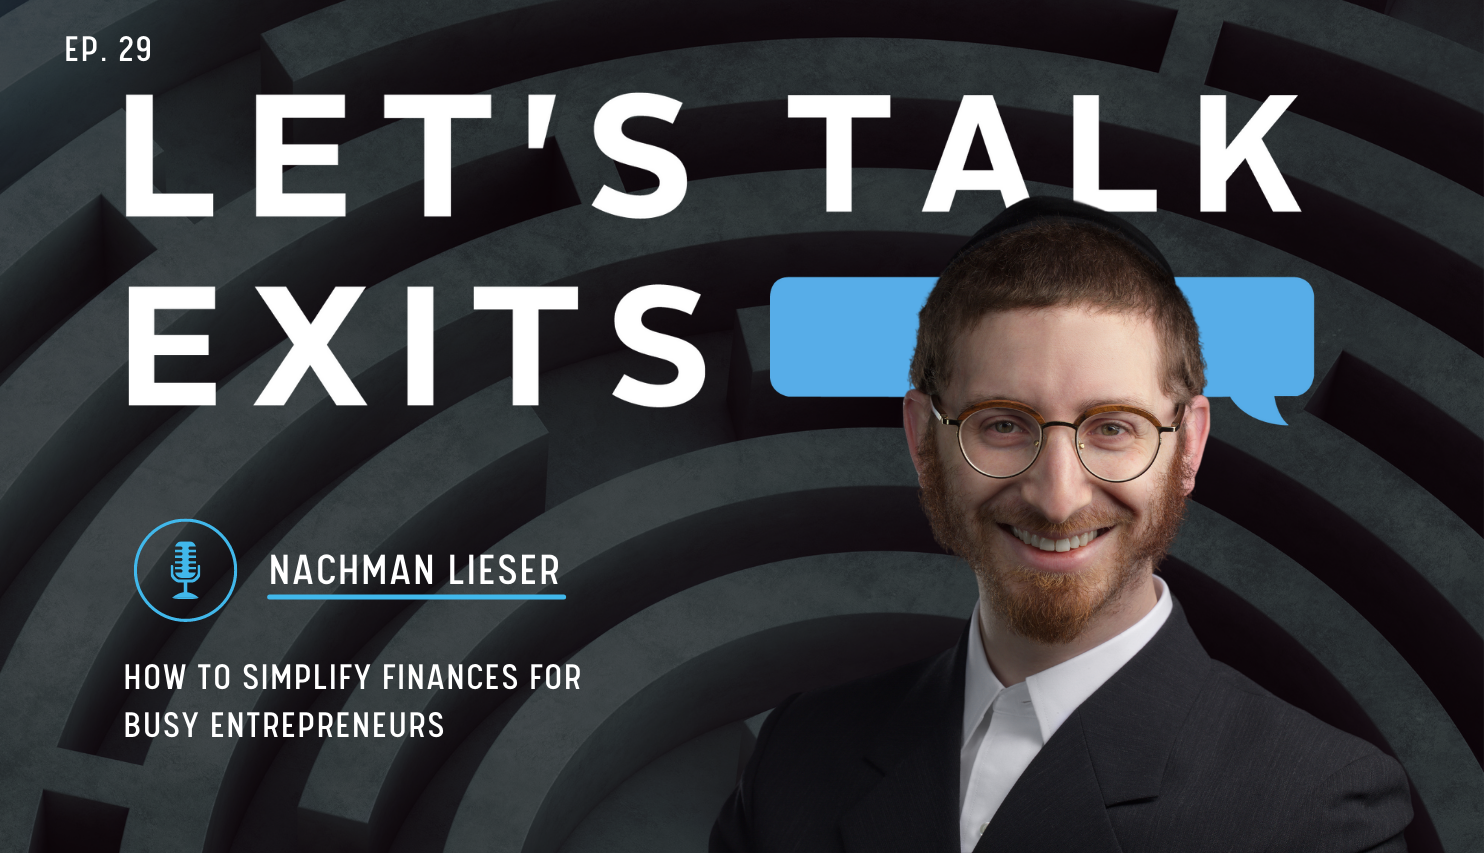 How to Simplify Finances for Busy Entrepreneurs with Nachman Lieser